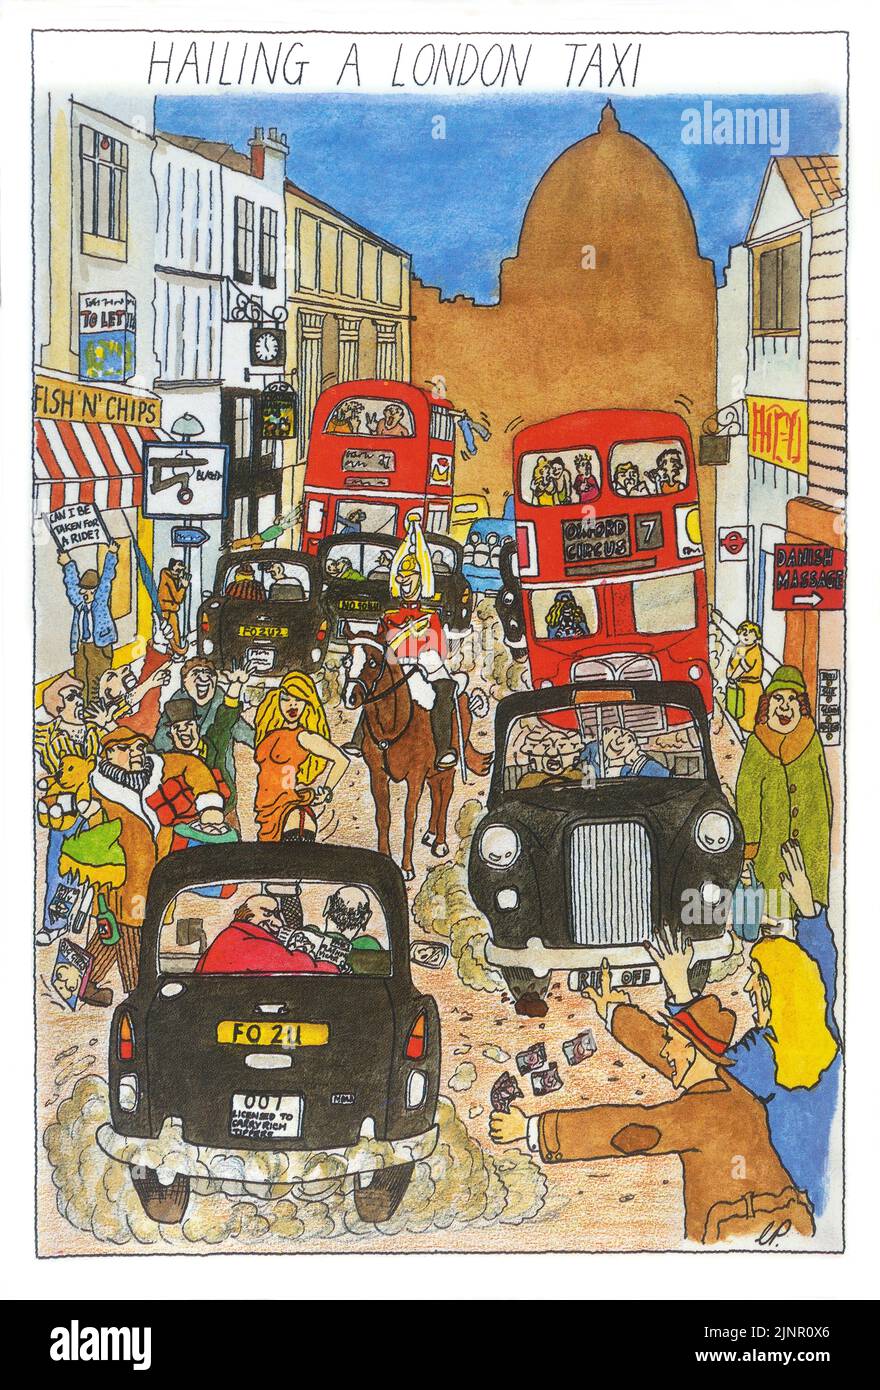 1980's Hailing a London taxi, 1980's amusing funny London postcard by Chris Parker Stock Photo